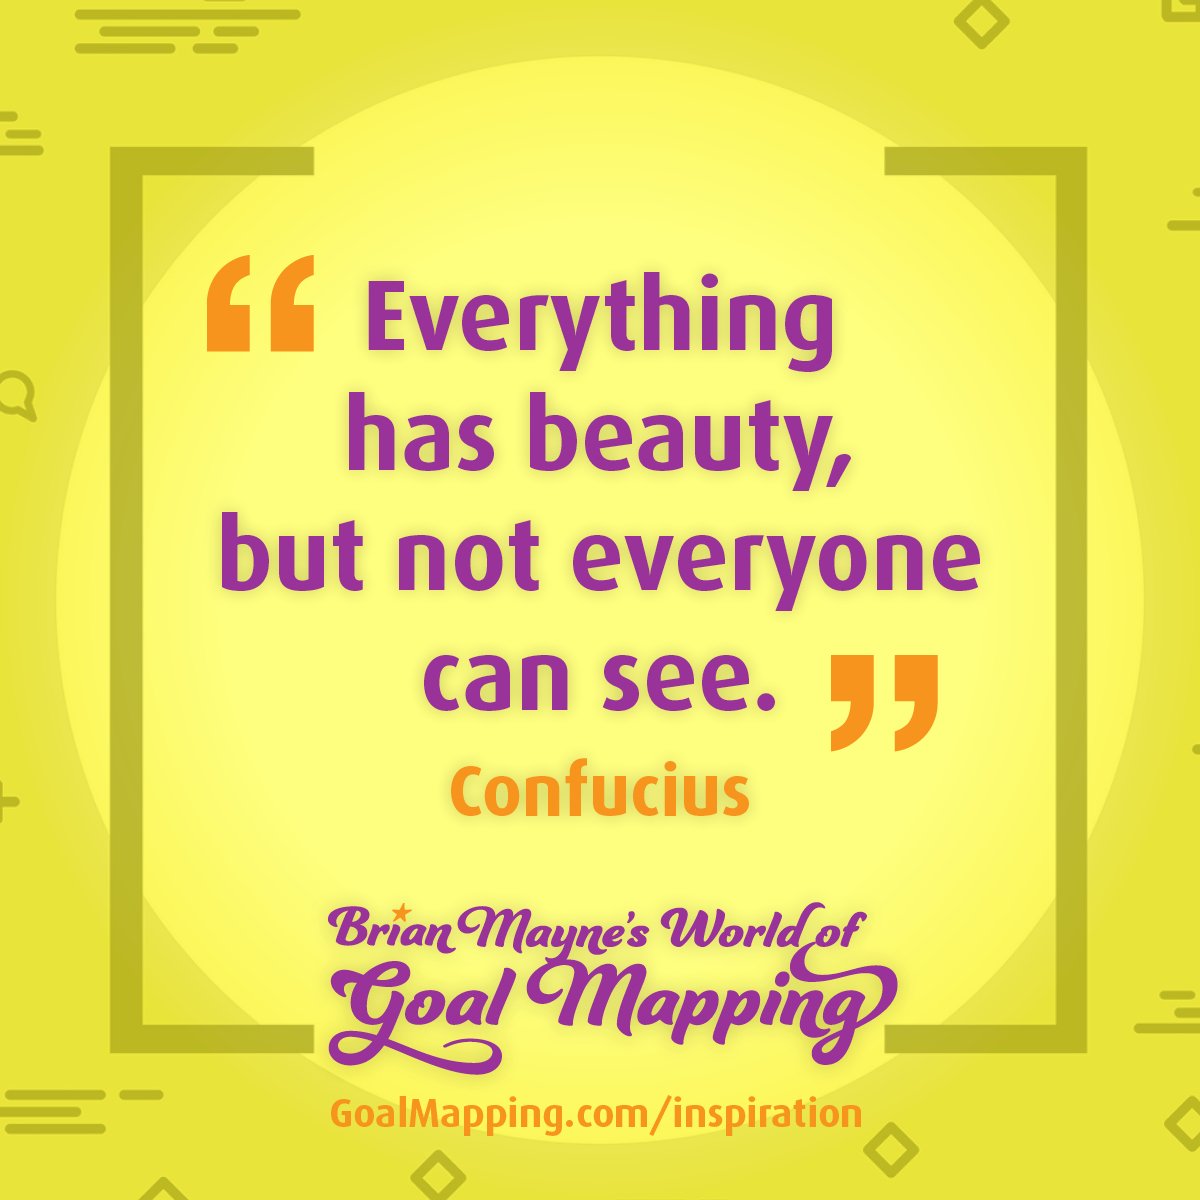 "Everything has beauty, but not everyone can see." Confucius